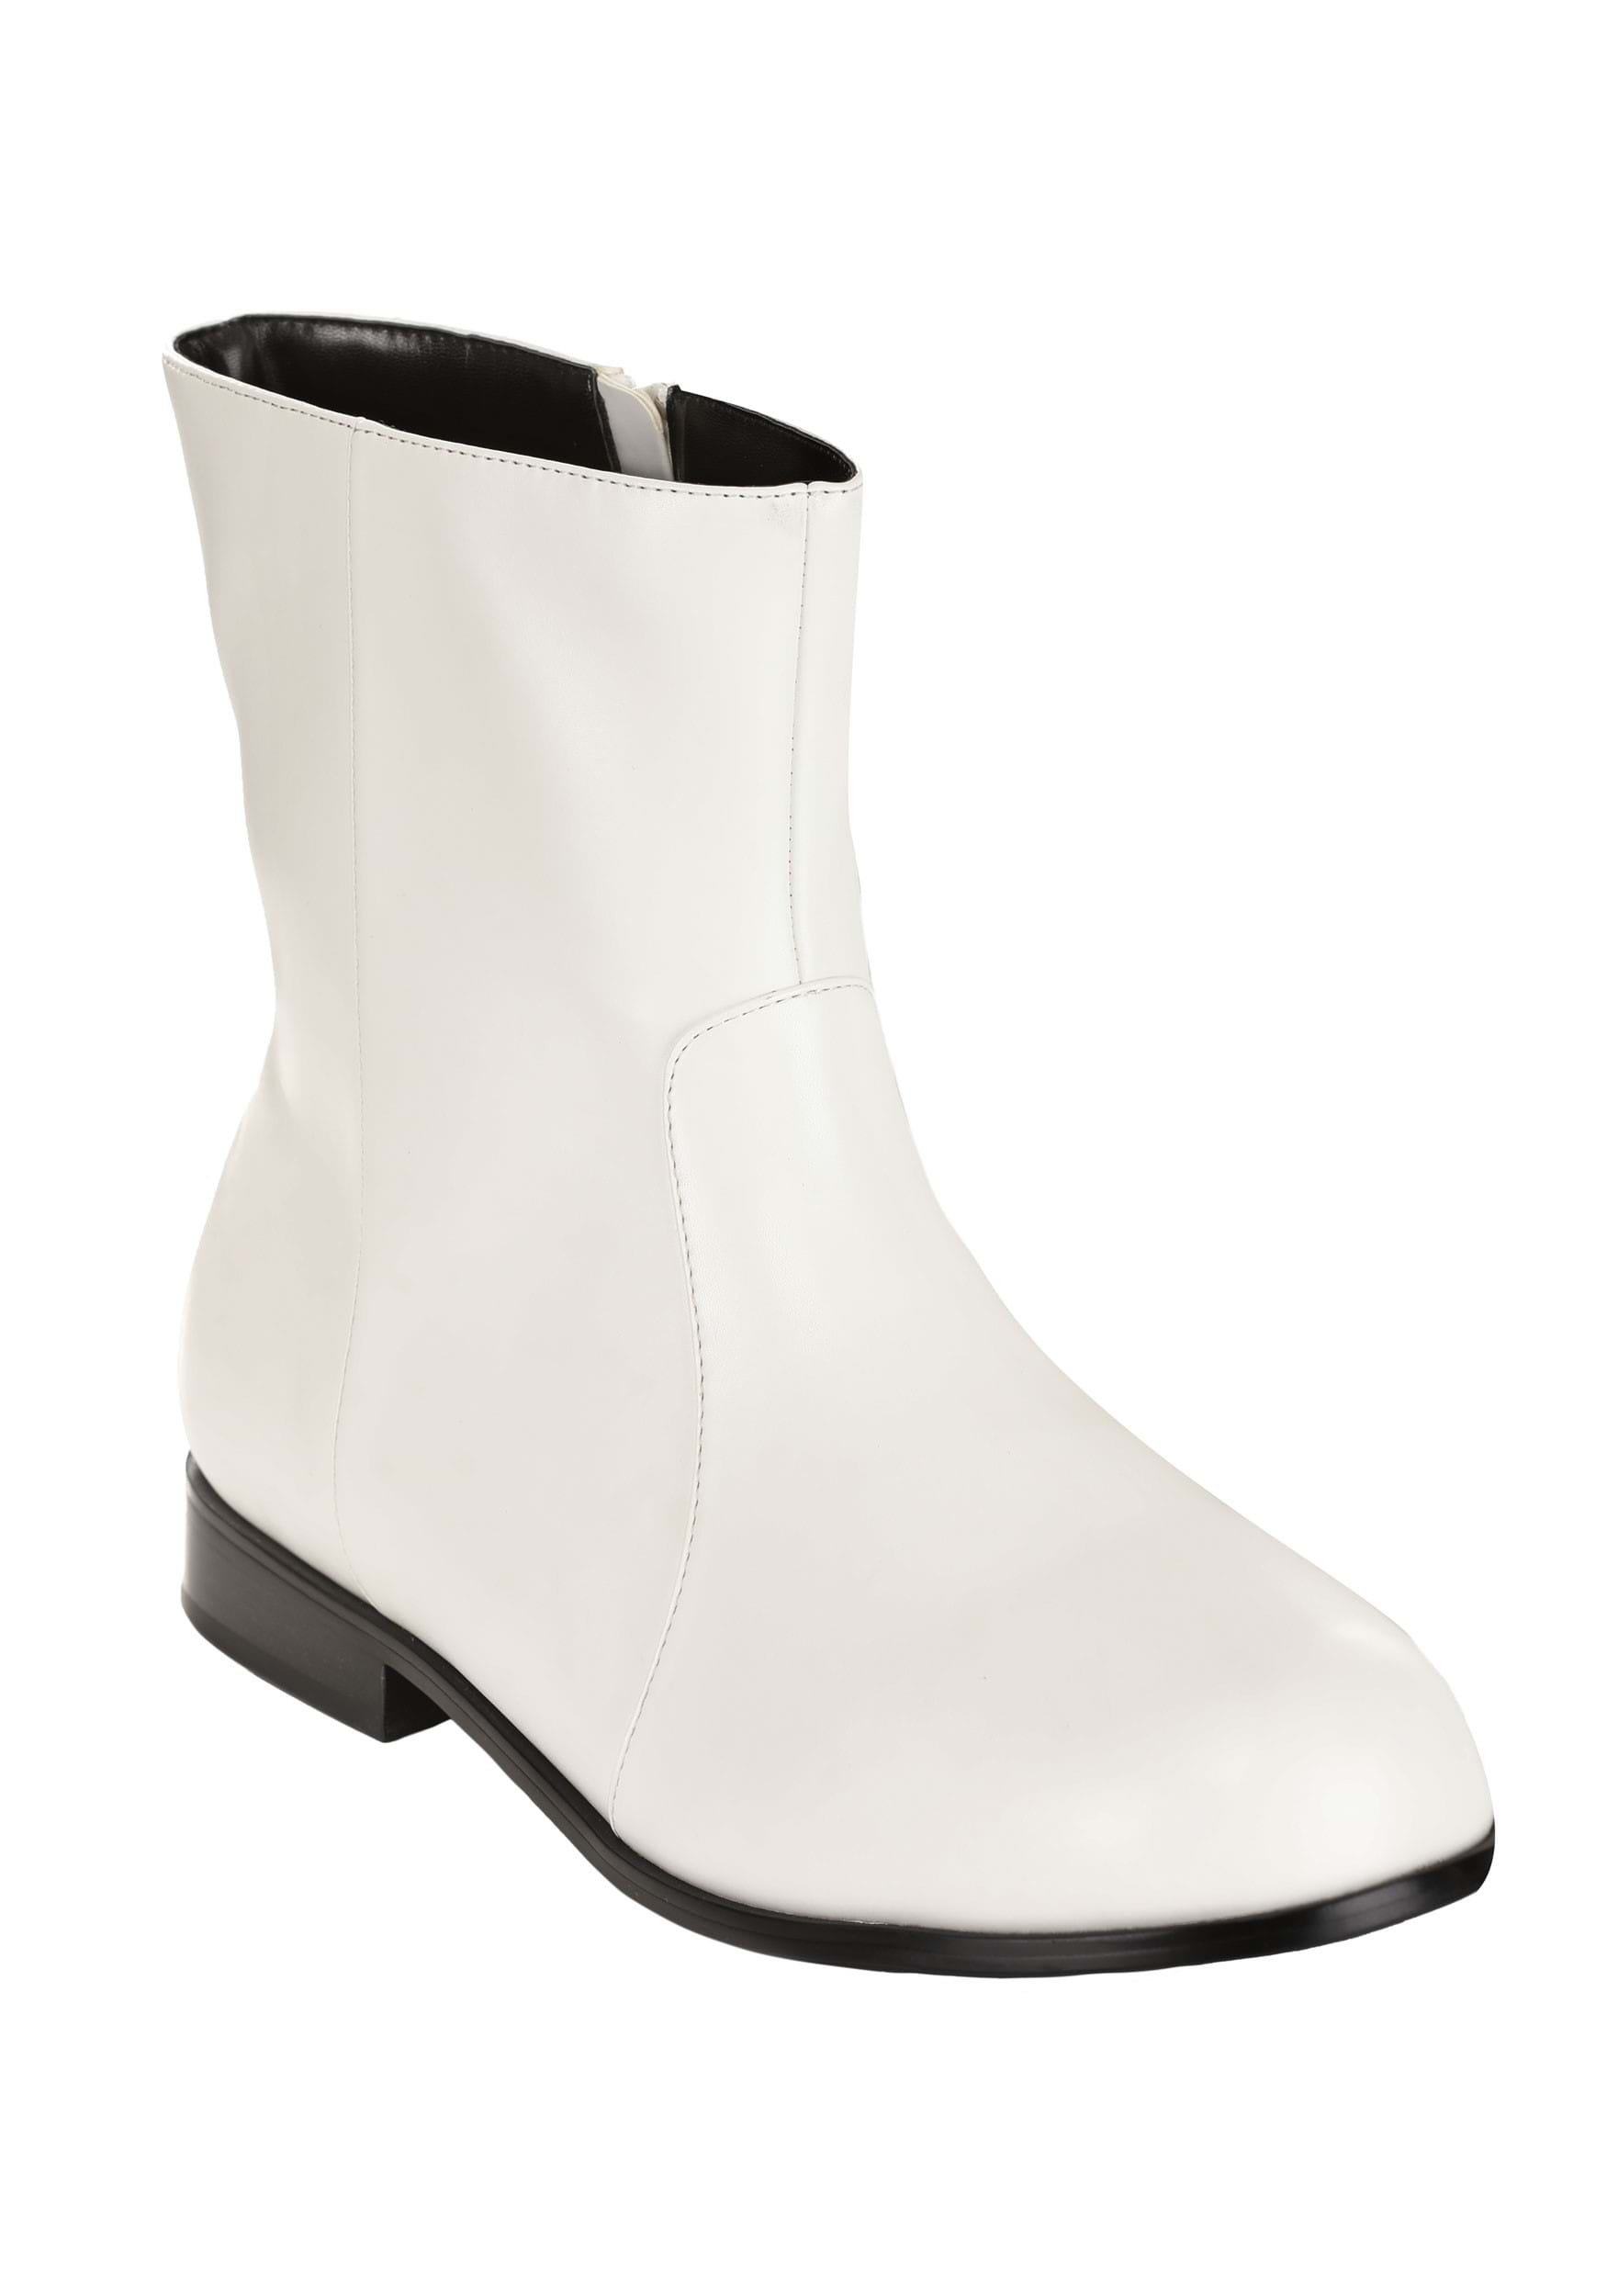 https://images.halloweencostumes.com/products/76947/1-1/adult-white-70s-boots.jpg